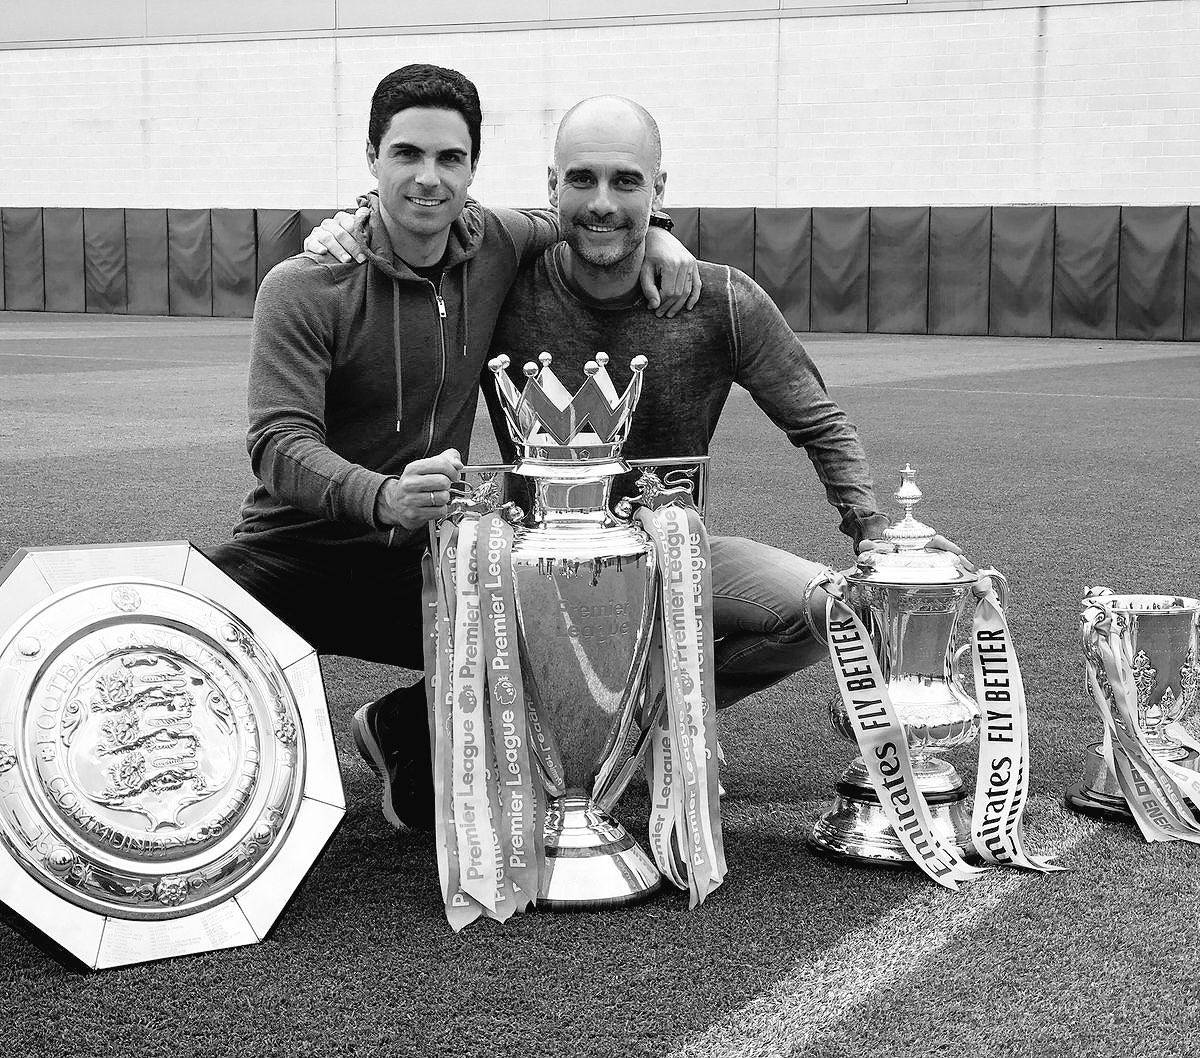 Now that I’ve reached the end of my thread, I would just like to express my greatest gratitude towards Mikel Arteta for his magnificent impact on City over the last few years. Thank you SO MUCH for the trophies and all the joy. I wish you nothing but success at Arsenal 